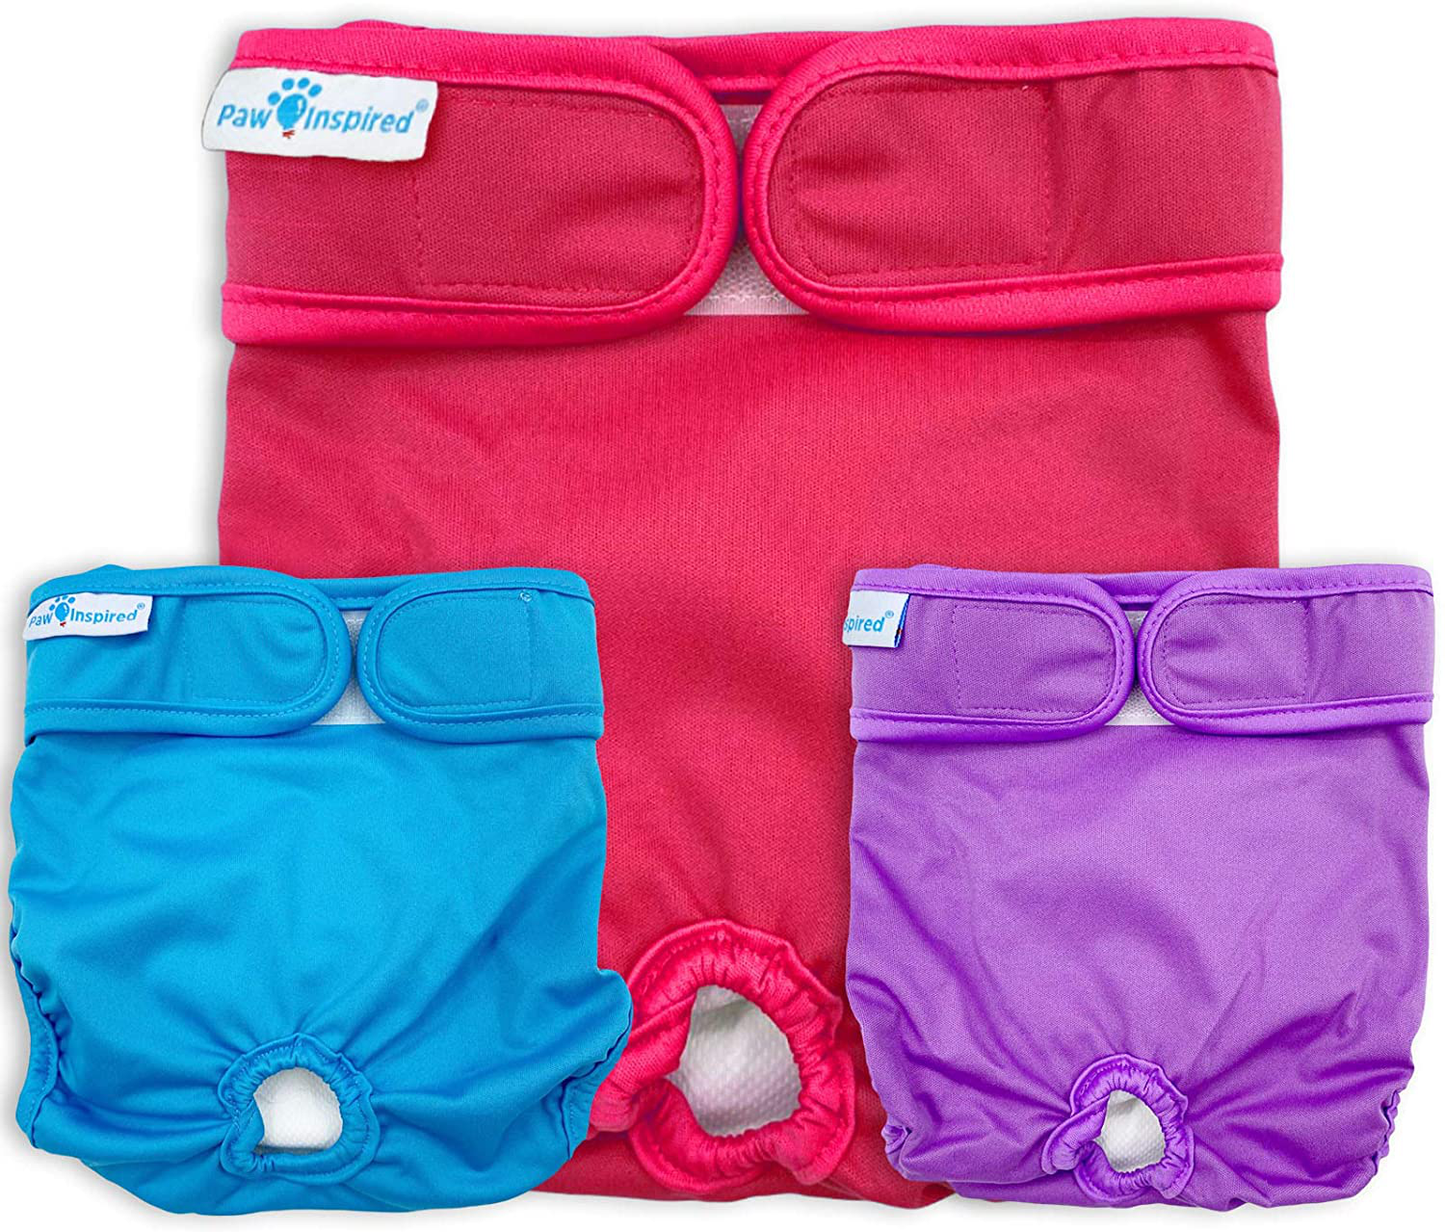 Paw Inspired Washable Dog Diapers | Reusable Dog Diapers | Washable Female Dog Diapers | Cloth Dog Diapers for Dogs in Heat, or Dog Incontinence Diapers